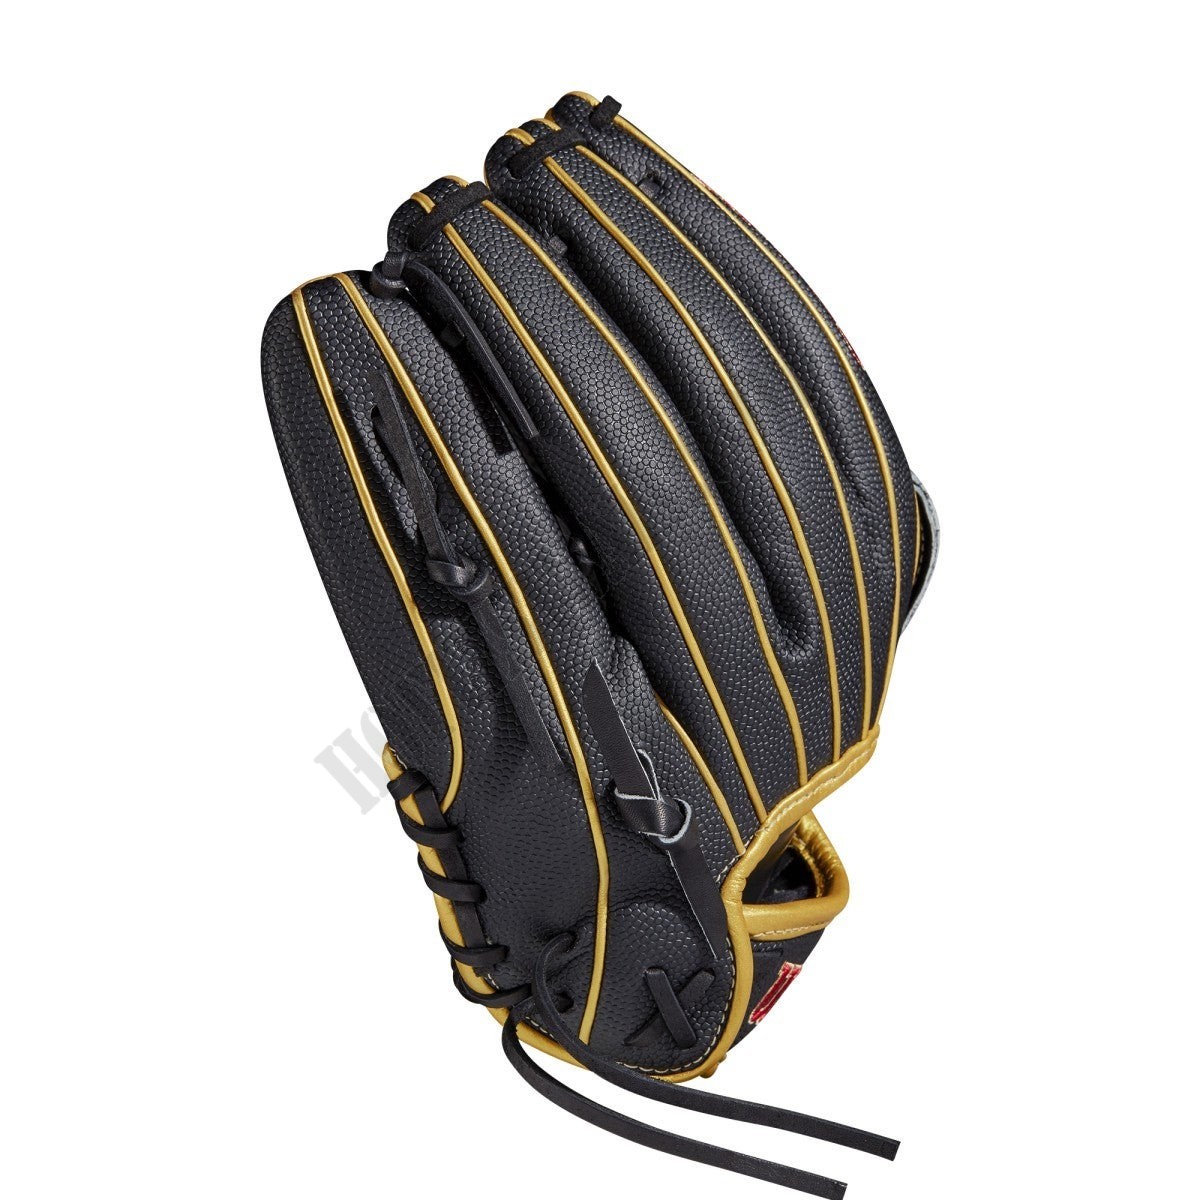 2021 A2000 SR32 GM 12" Infield Fastpitch Glove ● Wilson Promotions - -4